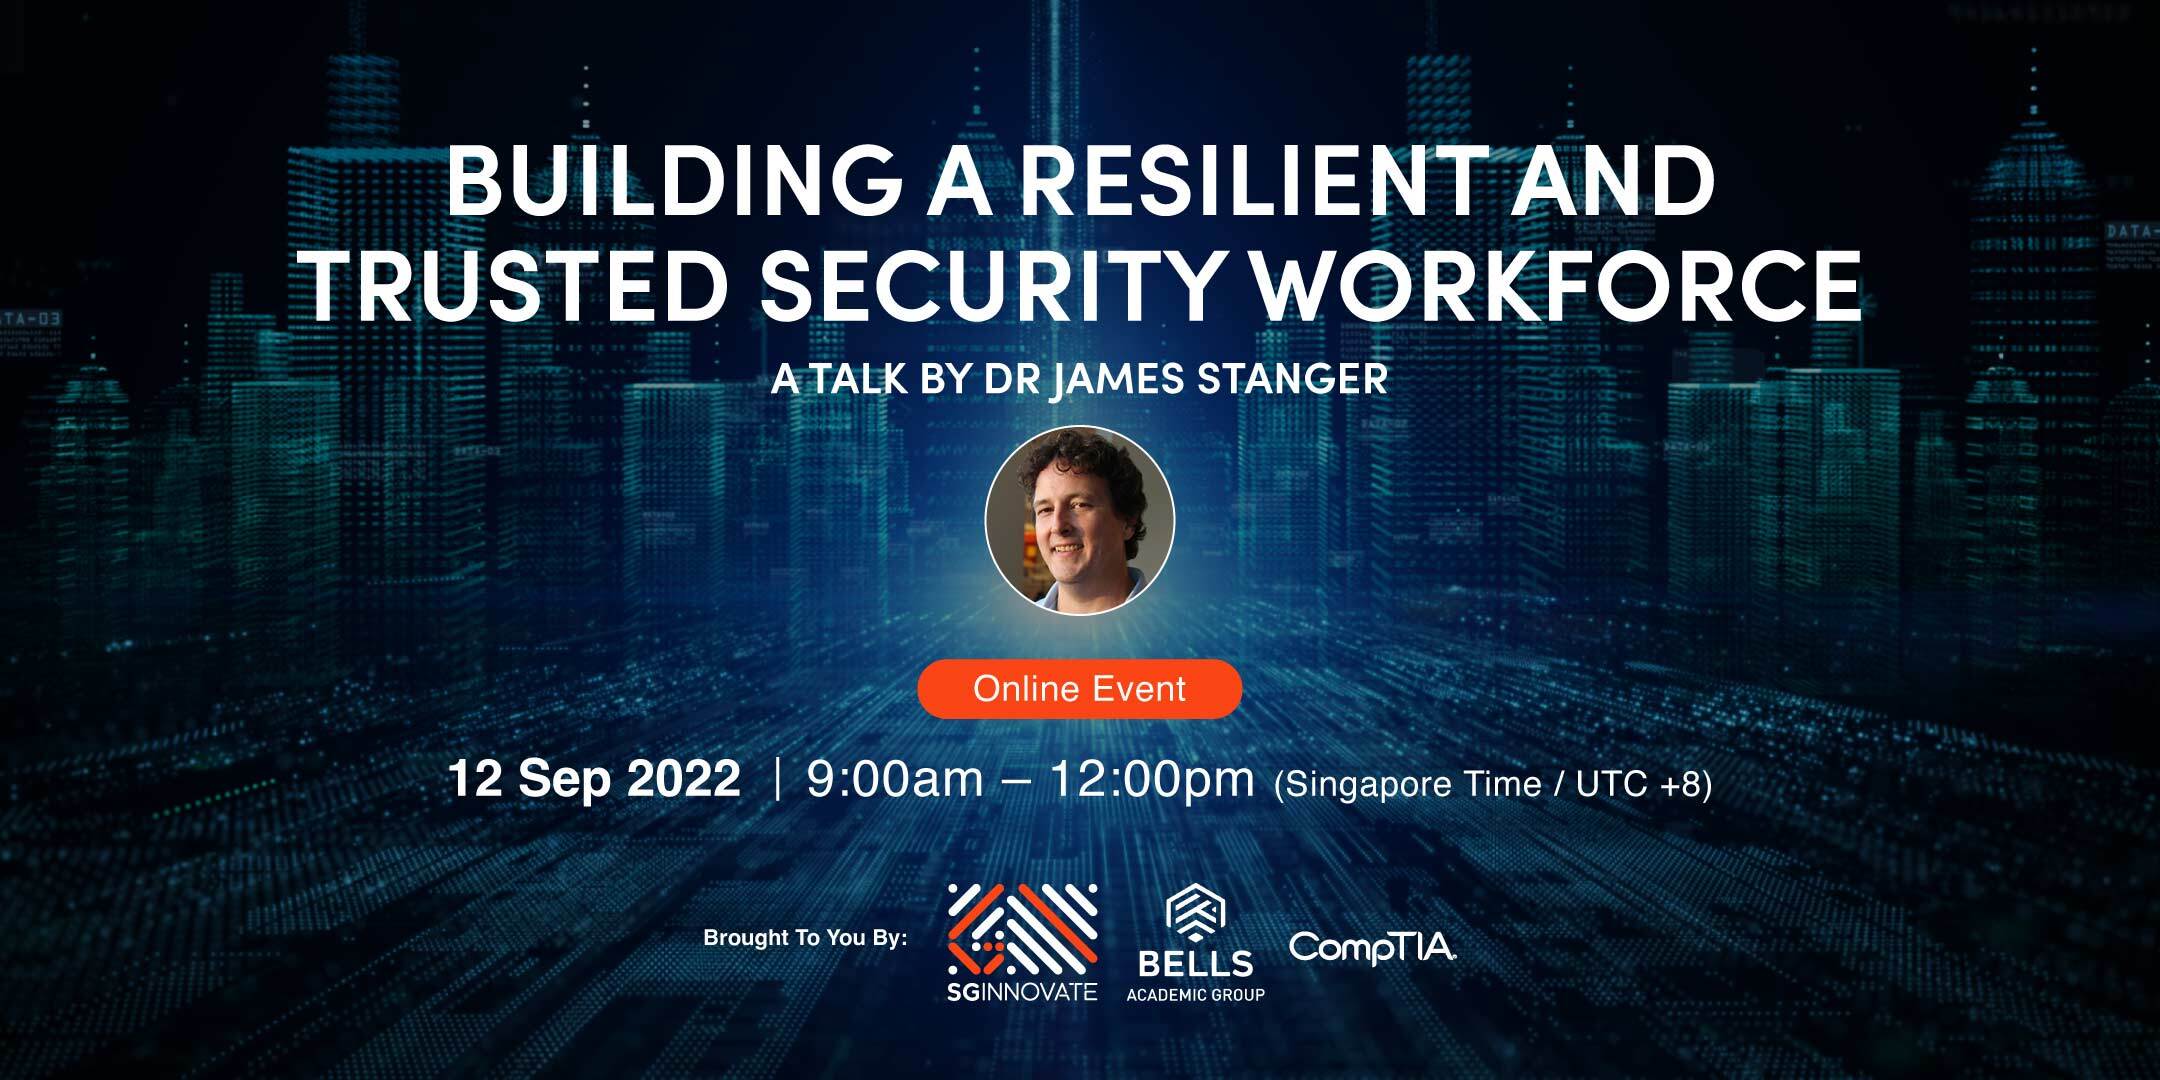 Building a Resilient and Trusted Security Workforce